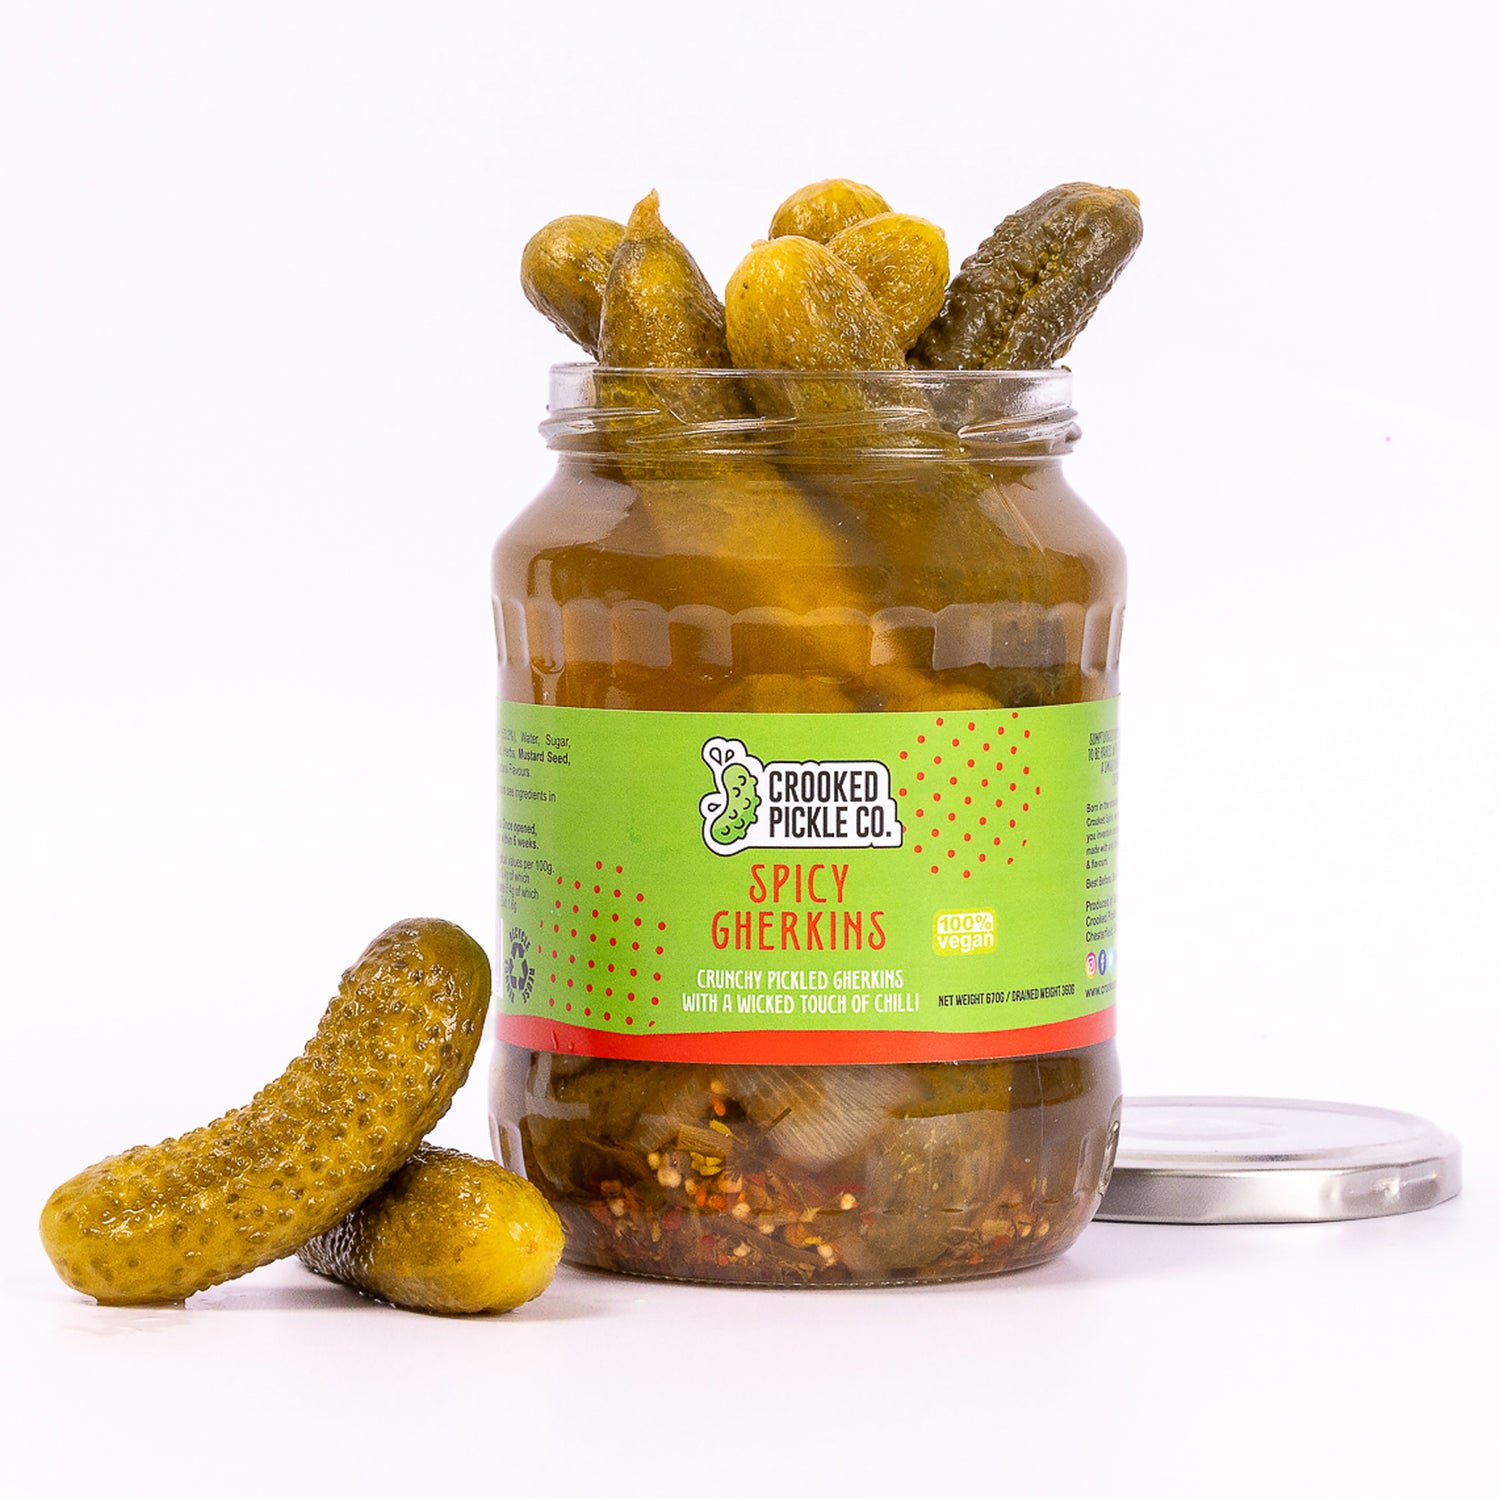 Gherkins made for cheeseboards. Spicy, crunchy, fresh and tasty. Party food and Christmas.